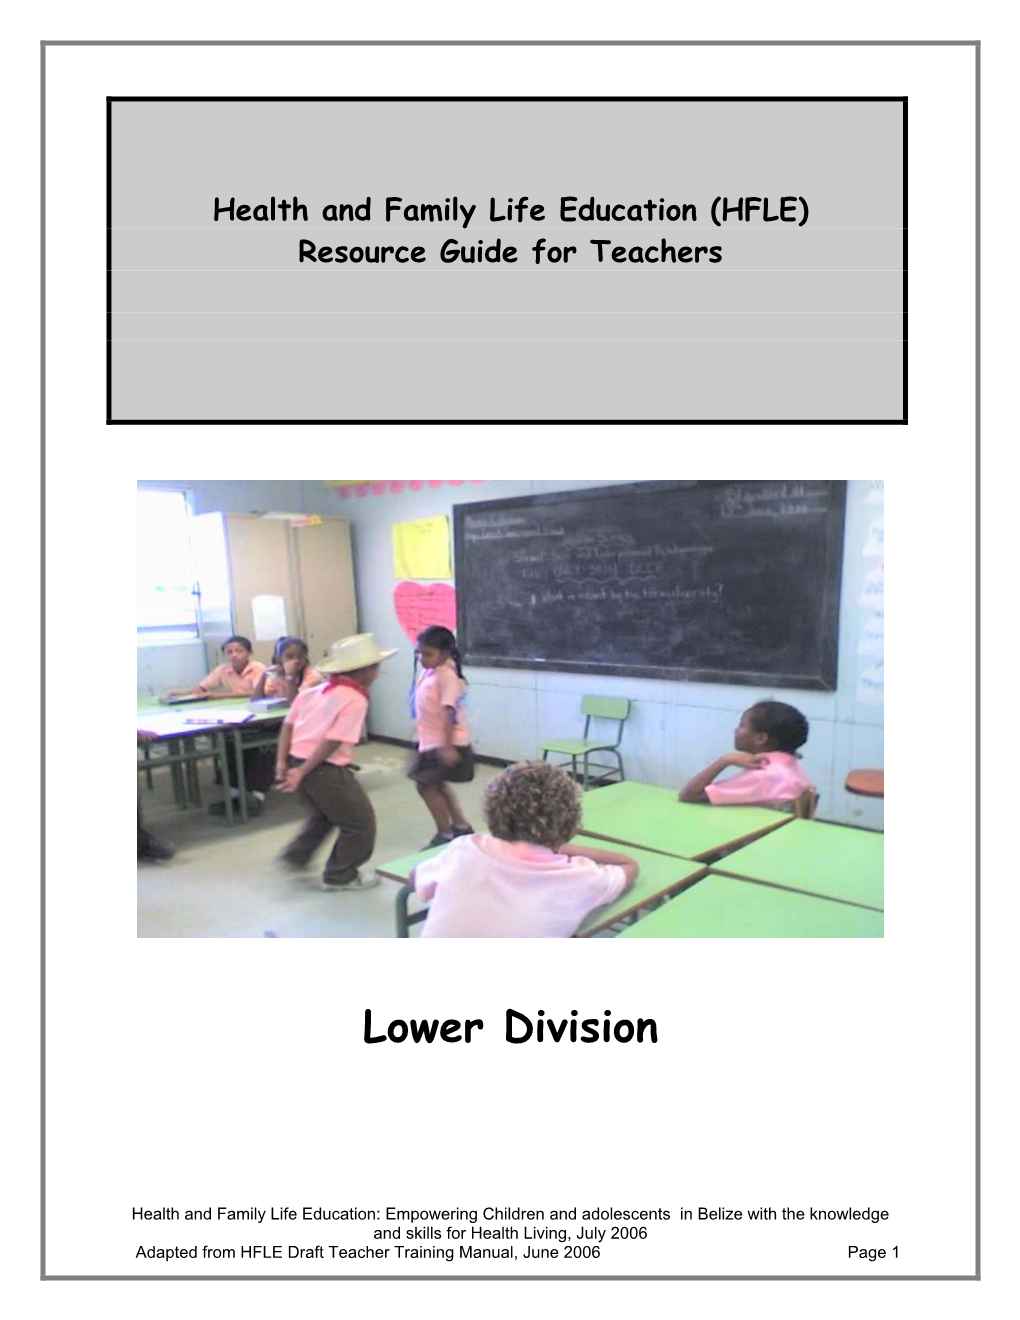 Health and Family Life Education (HFLE) Resource Guide for Teachers